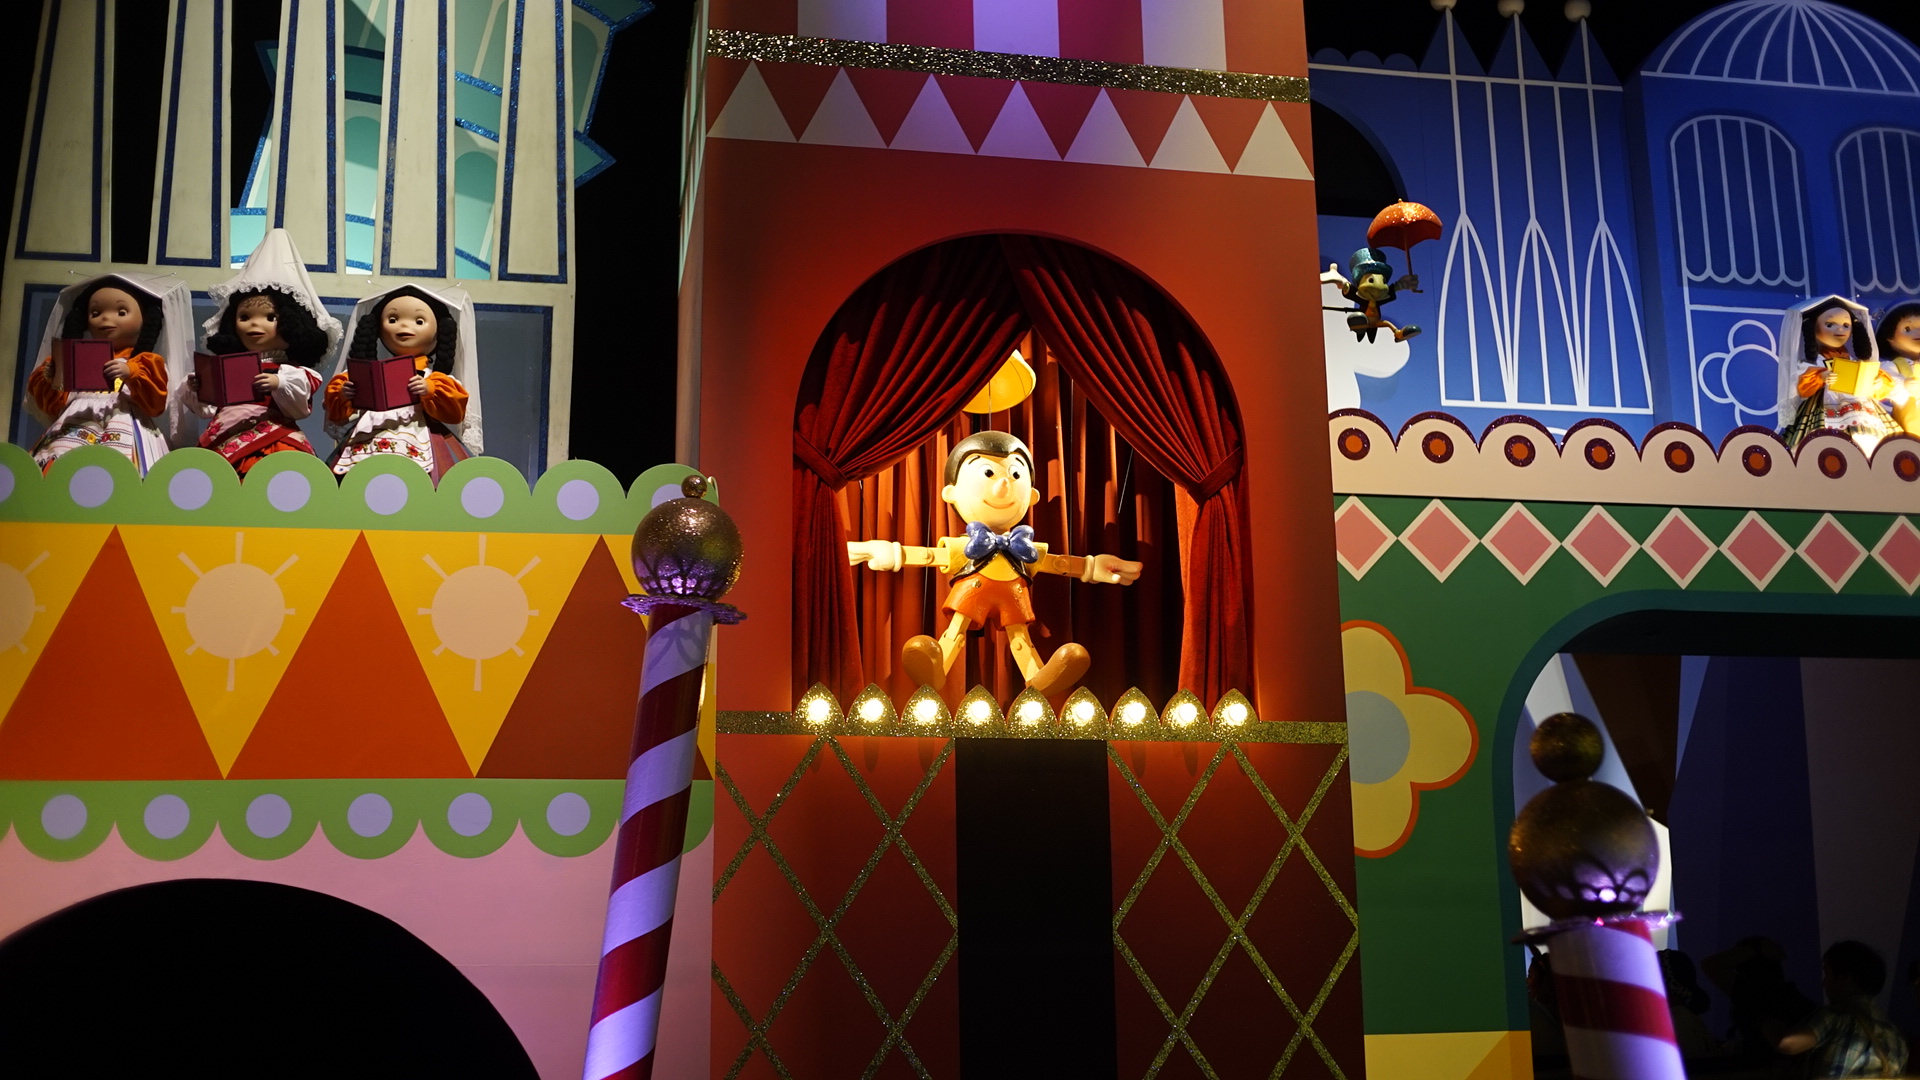 Pinocchio and Jiminy Cricket appear in the Italy section of "it's a small world" at Tokyo Disneyland